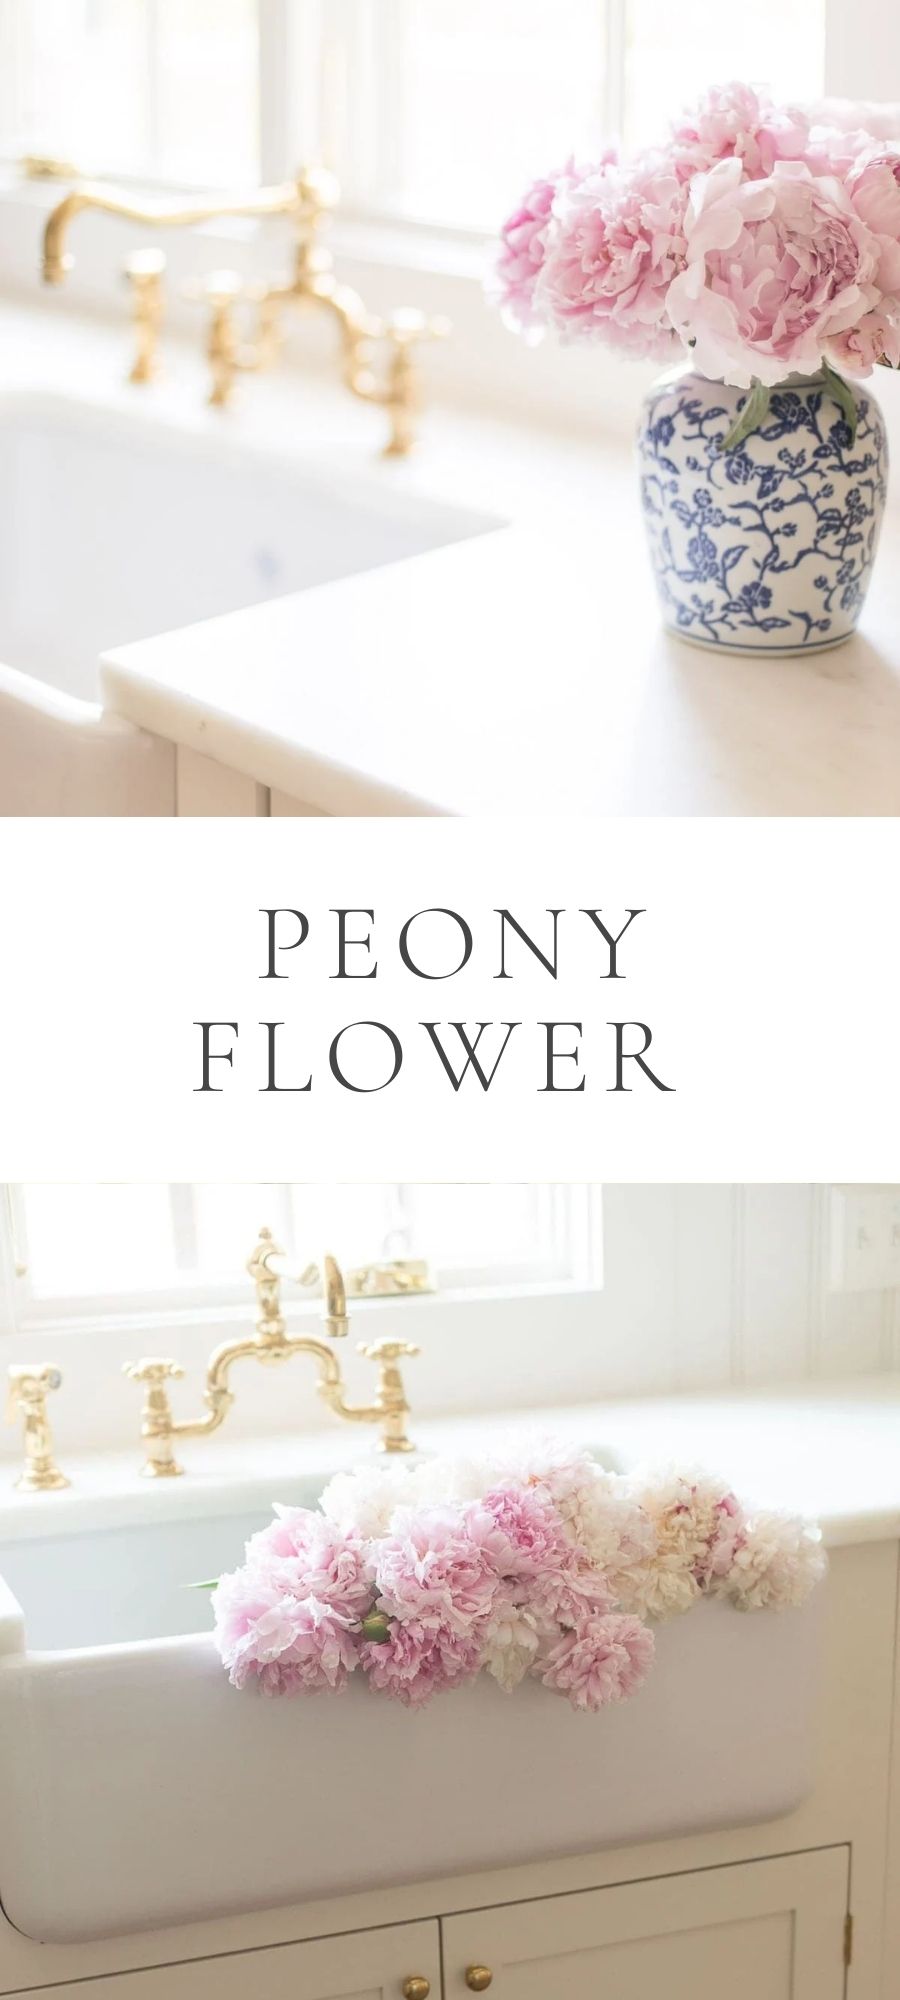 Peony Flower on kitchen counter in blue and white vase